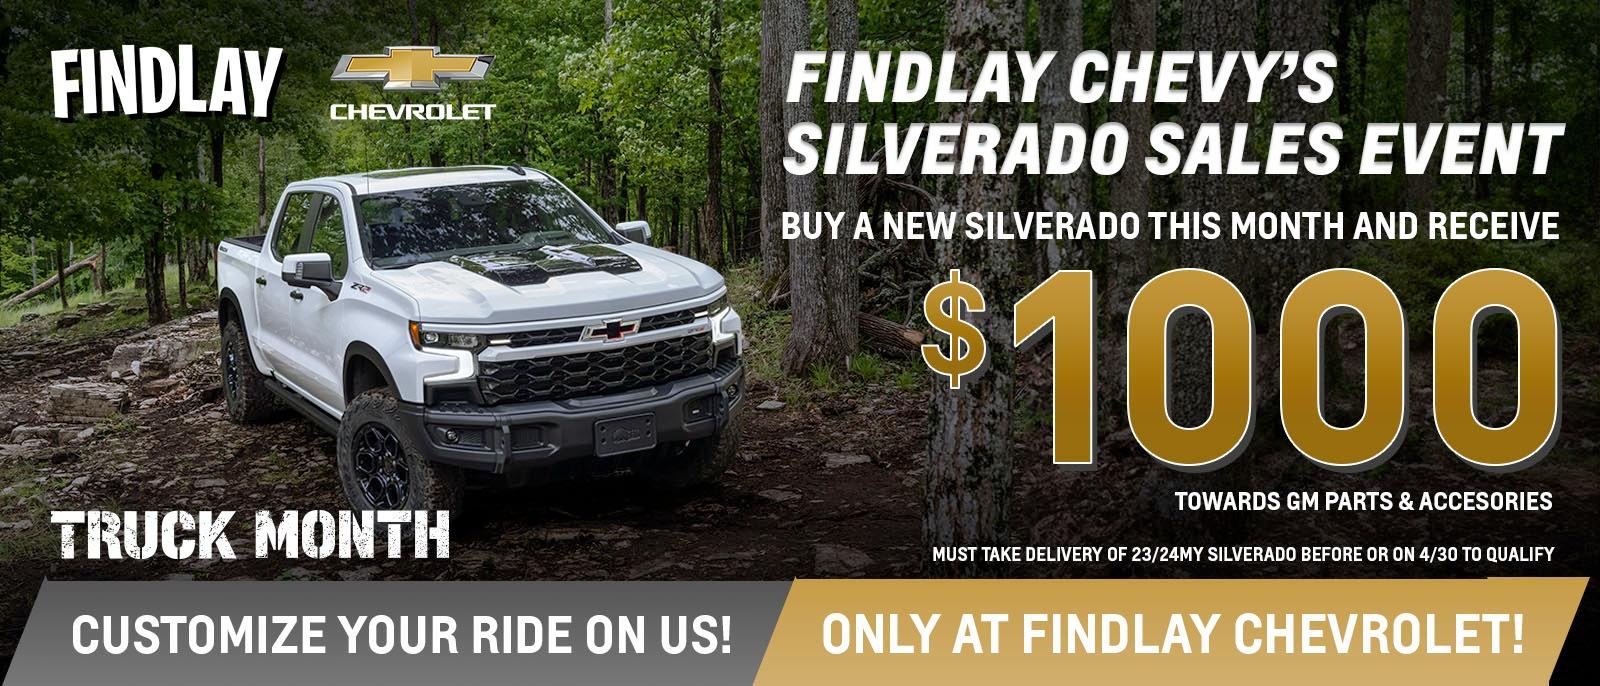 FINDLAY CHEVROLET FINDLAY CHEVY'S SILVERADO SALES EVENT BUY A NEW SILVERADO THIS MONTH AND RECEIVE $1000 TOWARDS GM PARTS & ACCESORIES MUST TAKE DELIVERY OF 23/24MY SILVERADO BEFORE OR ON 4/30 TO QUALIFY 
CUSTOMIZE YOUR RIDE ON US! ONLY AT FINDLAY CHEVROLET!